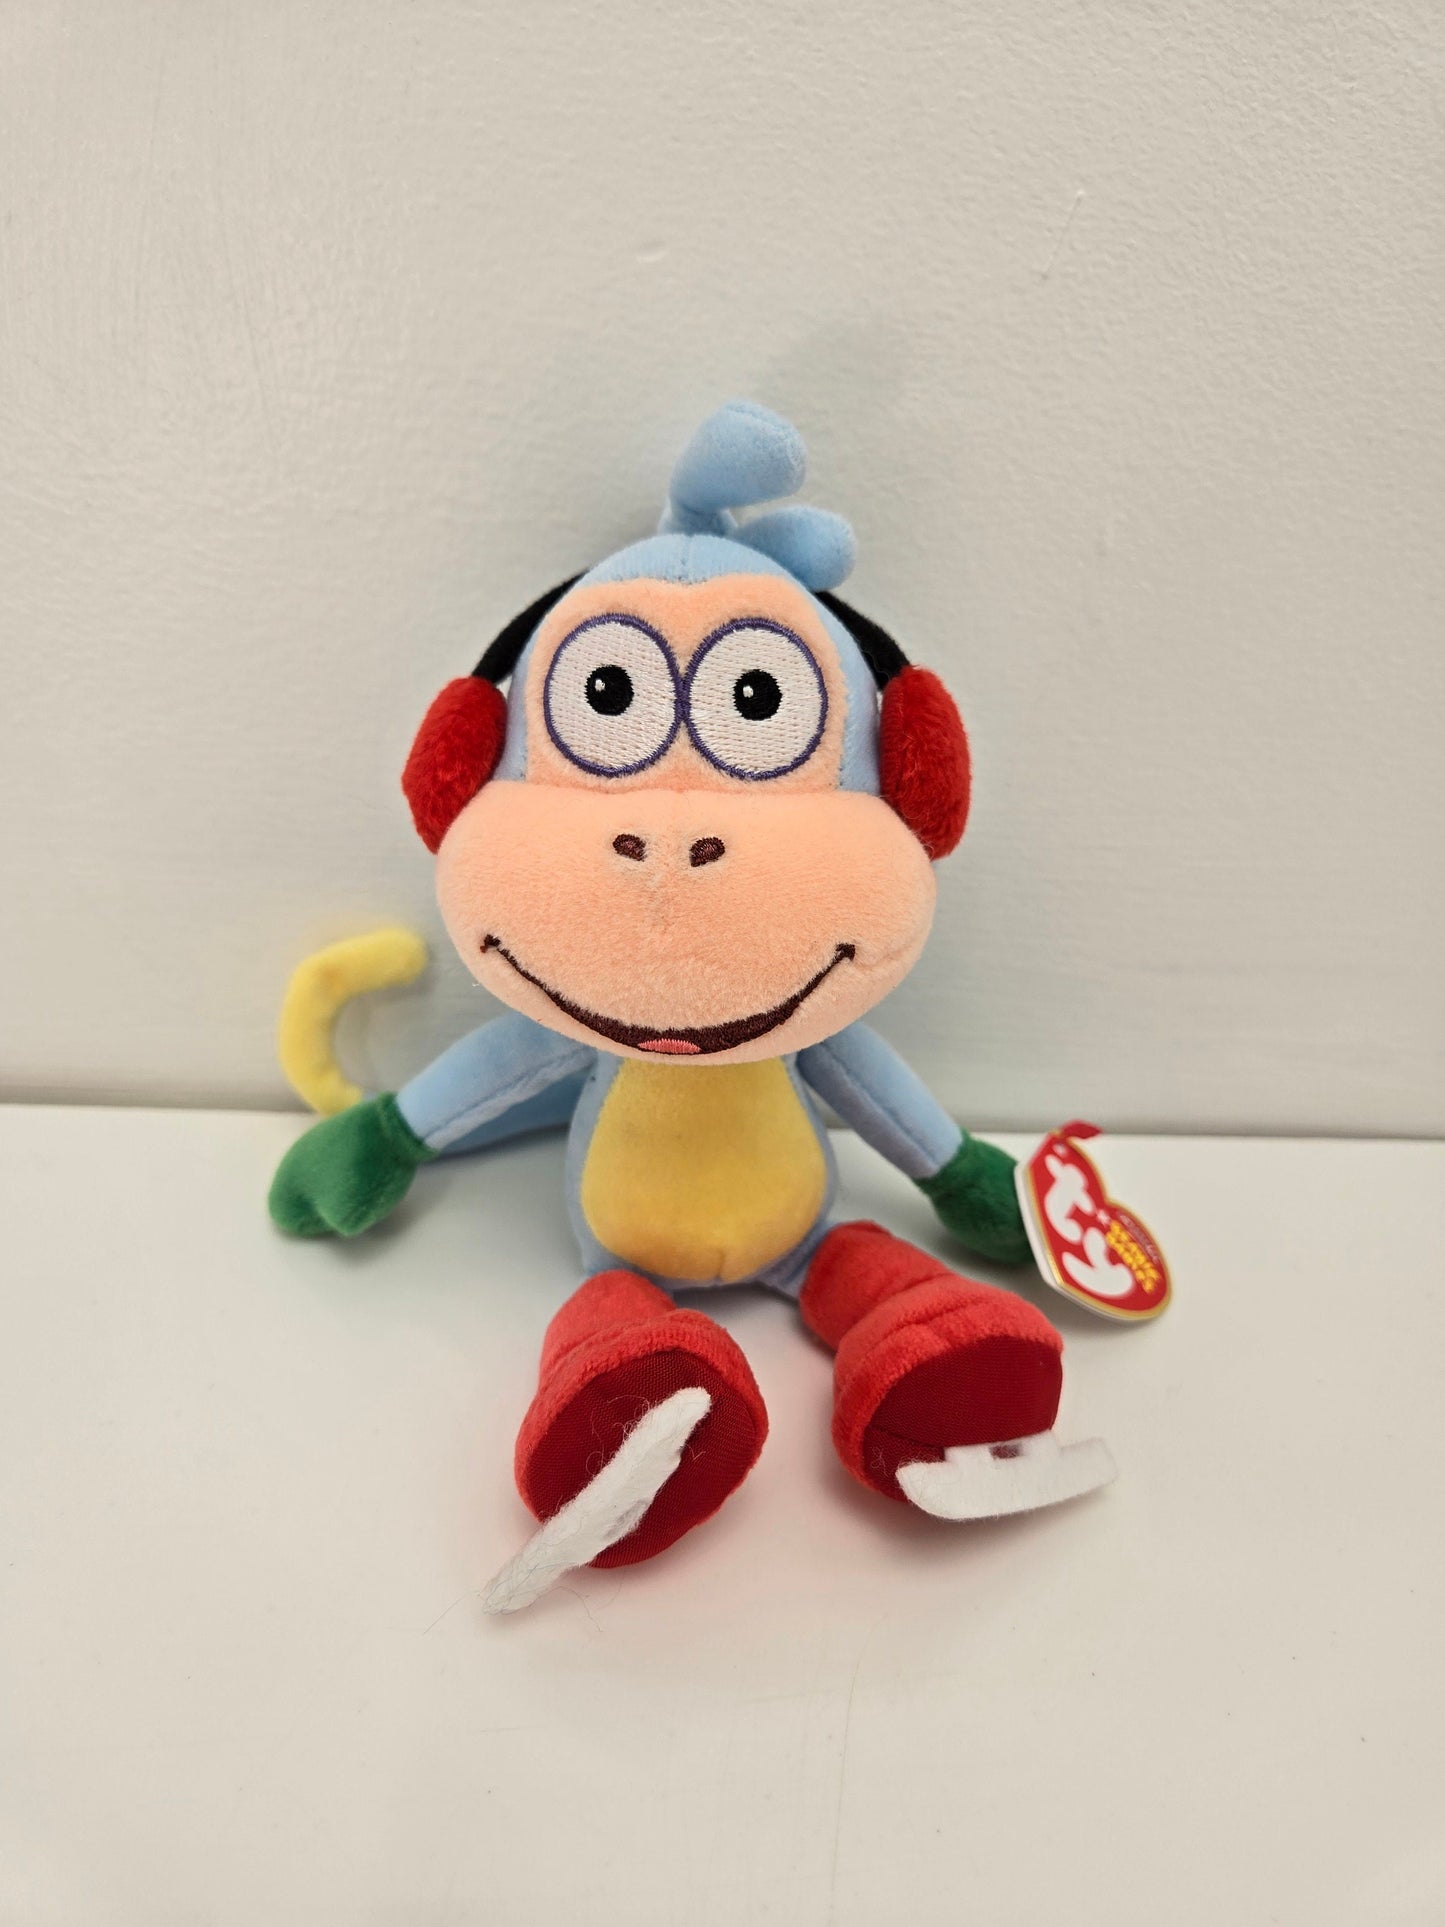 TY Beanie Baby “Boots” the monkey from Dora the Explorer - Skating edition! (7 inch)